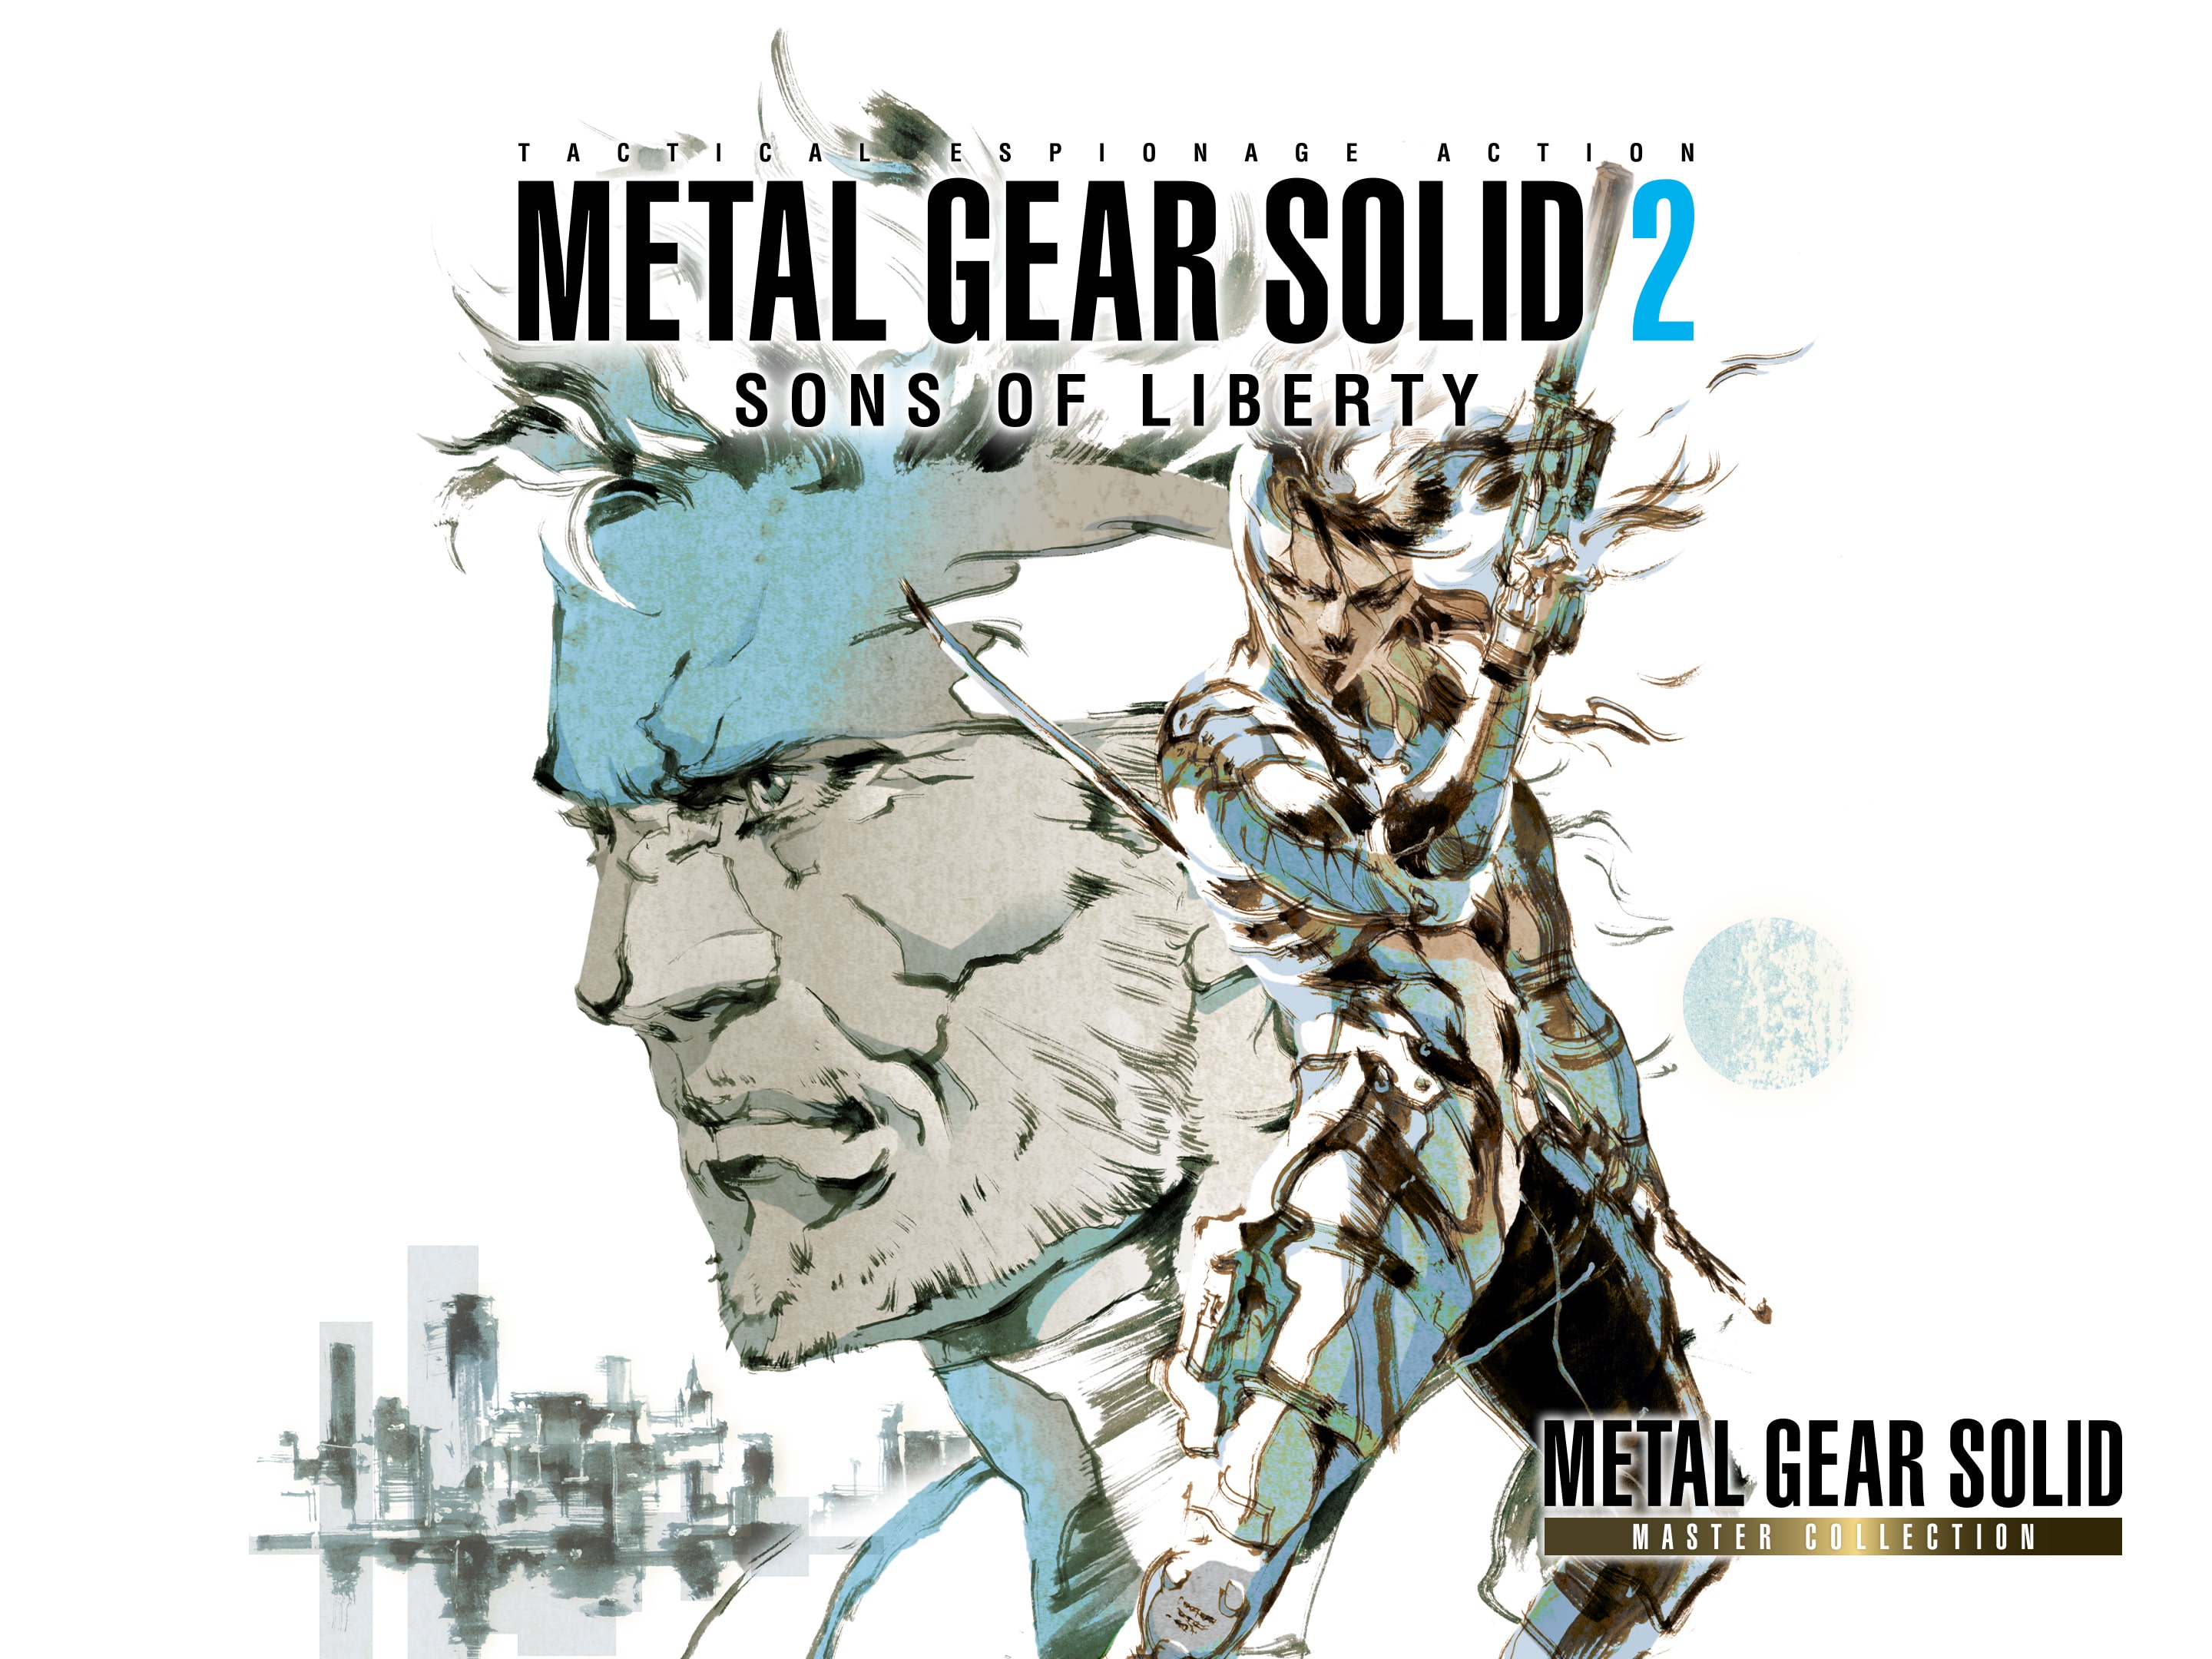 METAL GEAR SOLID 2 SONS OF LIBERTY (MASTER COLLECTION版) PS4 & PS5